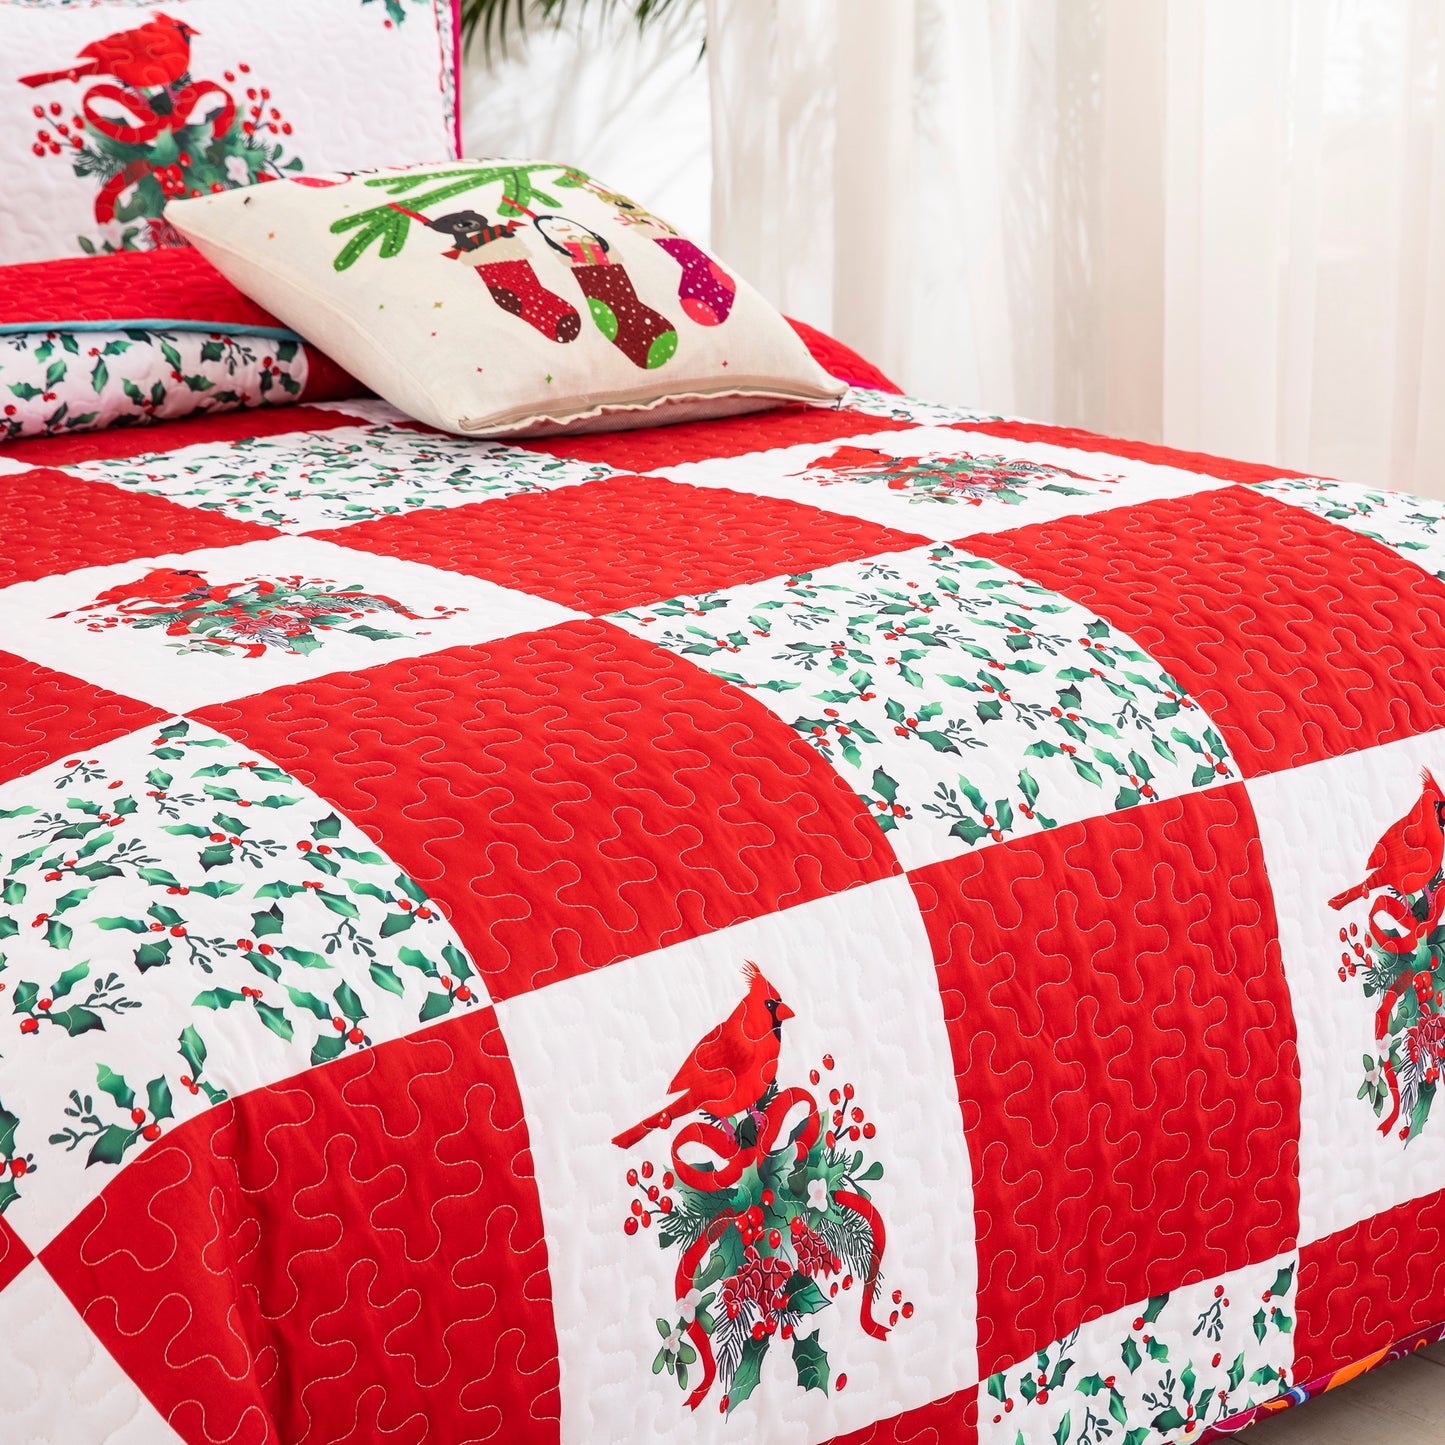 WONGS BEDDING Christmas Style Quilt Set with 2 Pillowcases